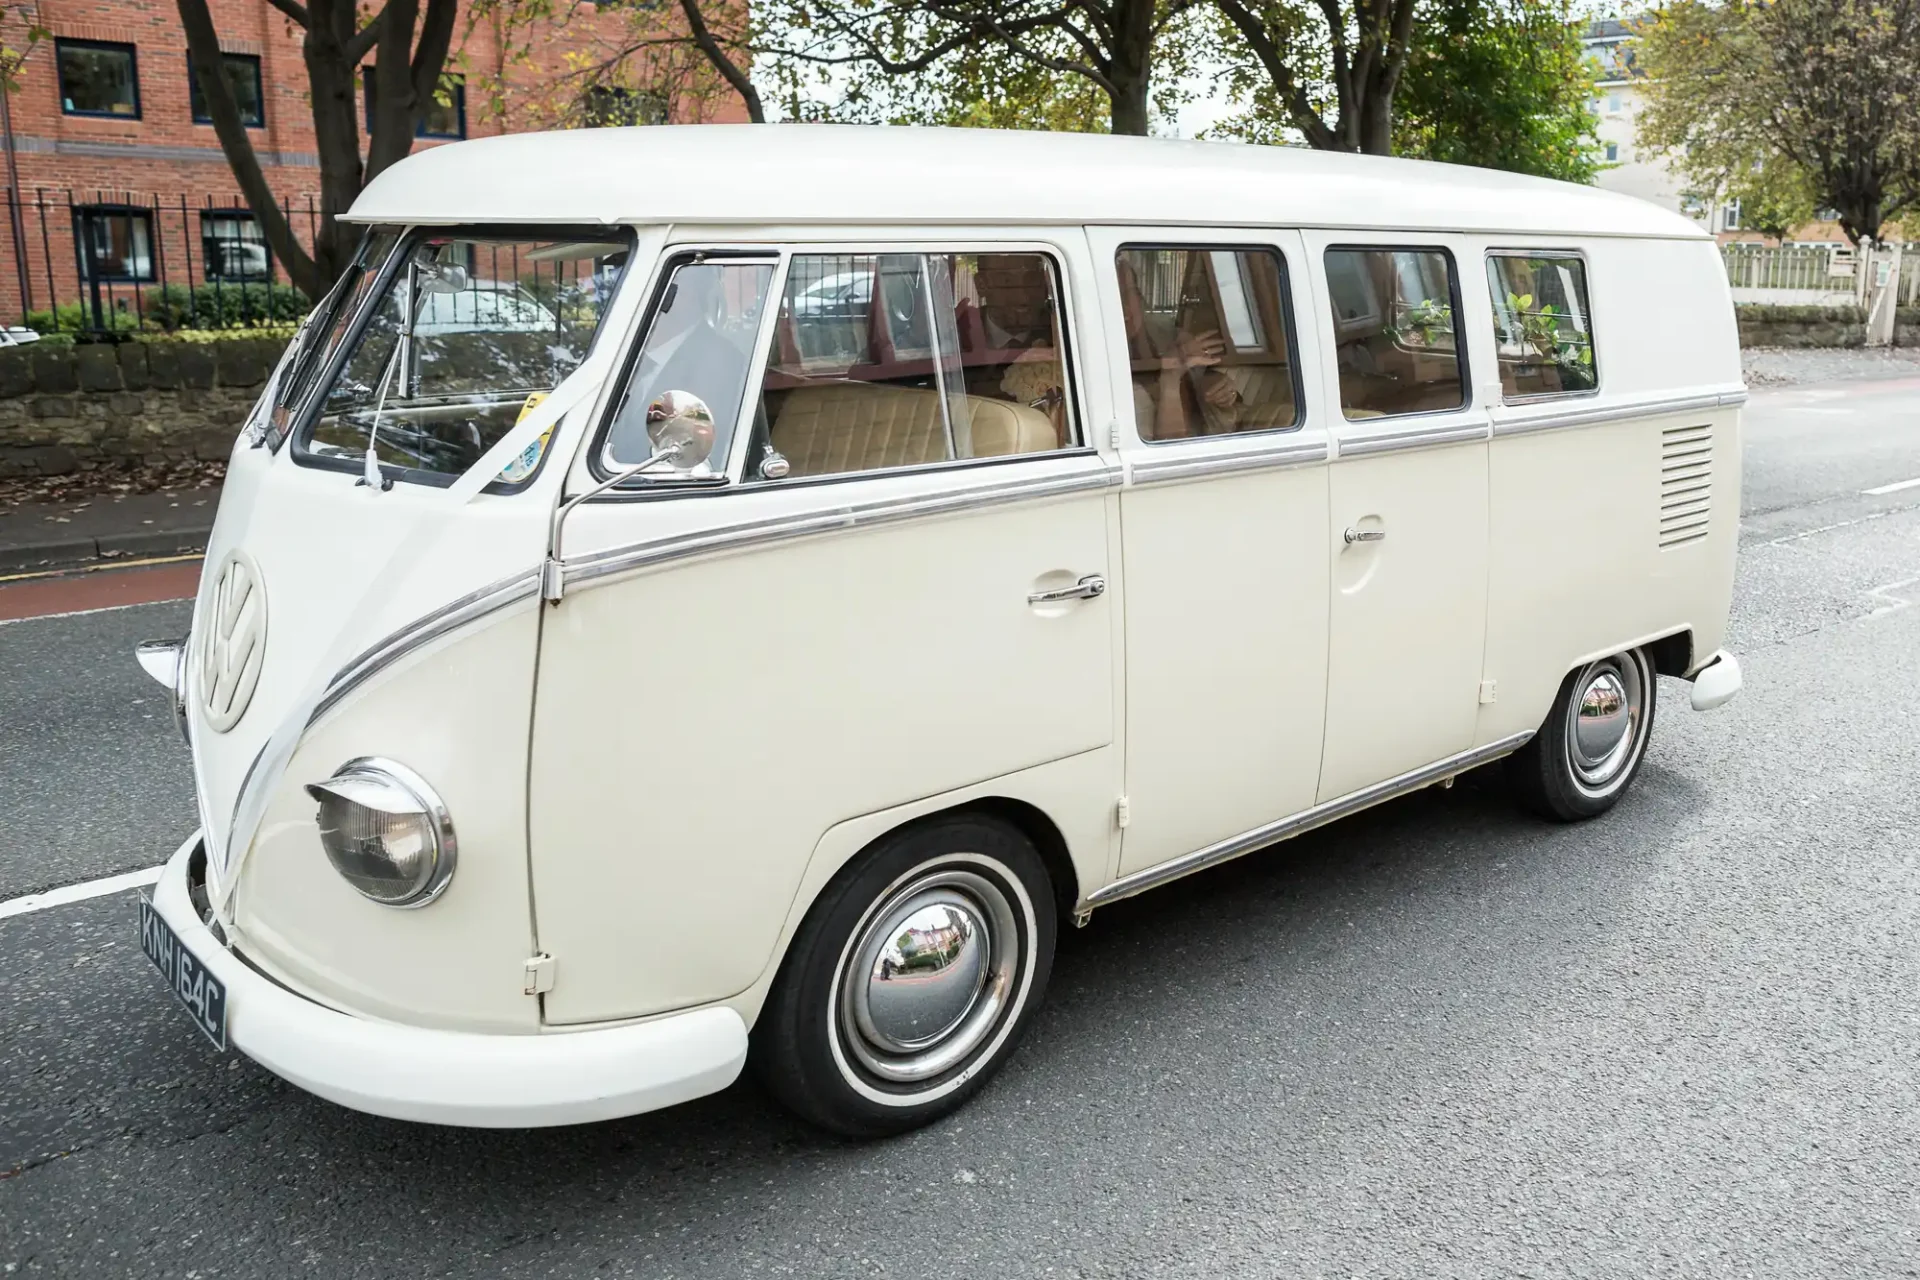 A vintage cream-colored volkswagen bus parked on a street, with a driver visible inside.